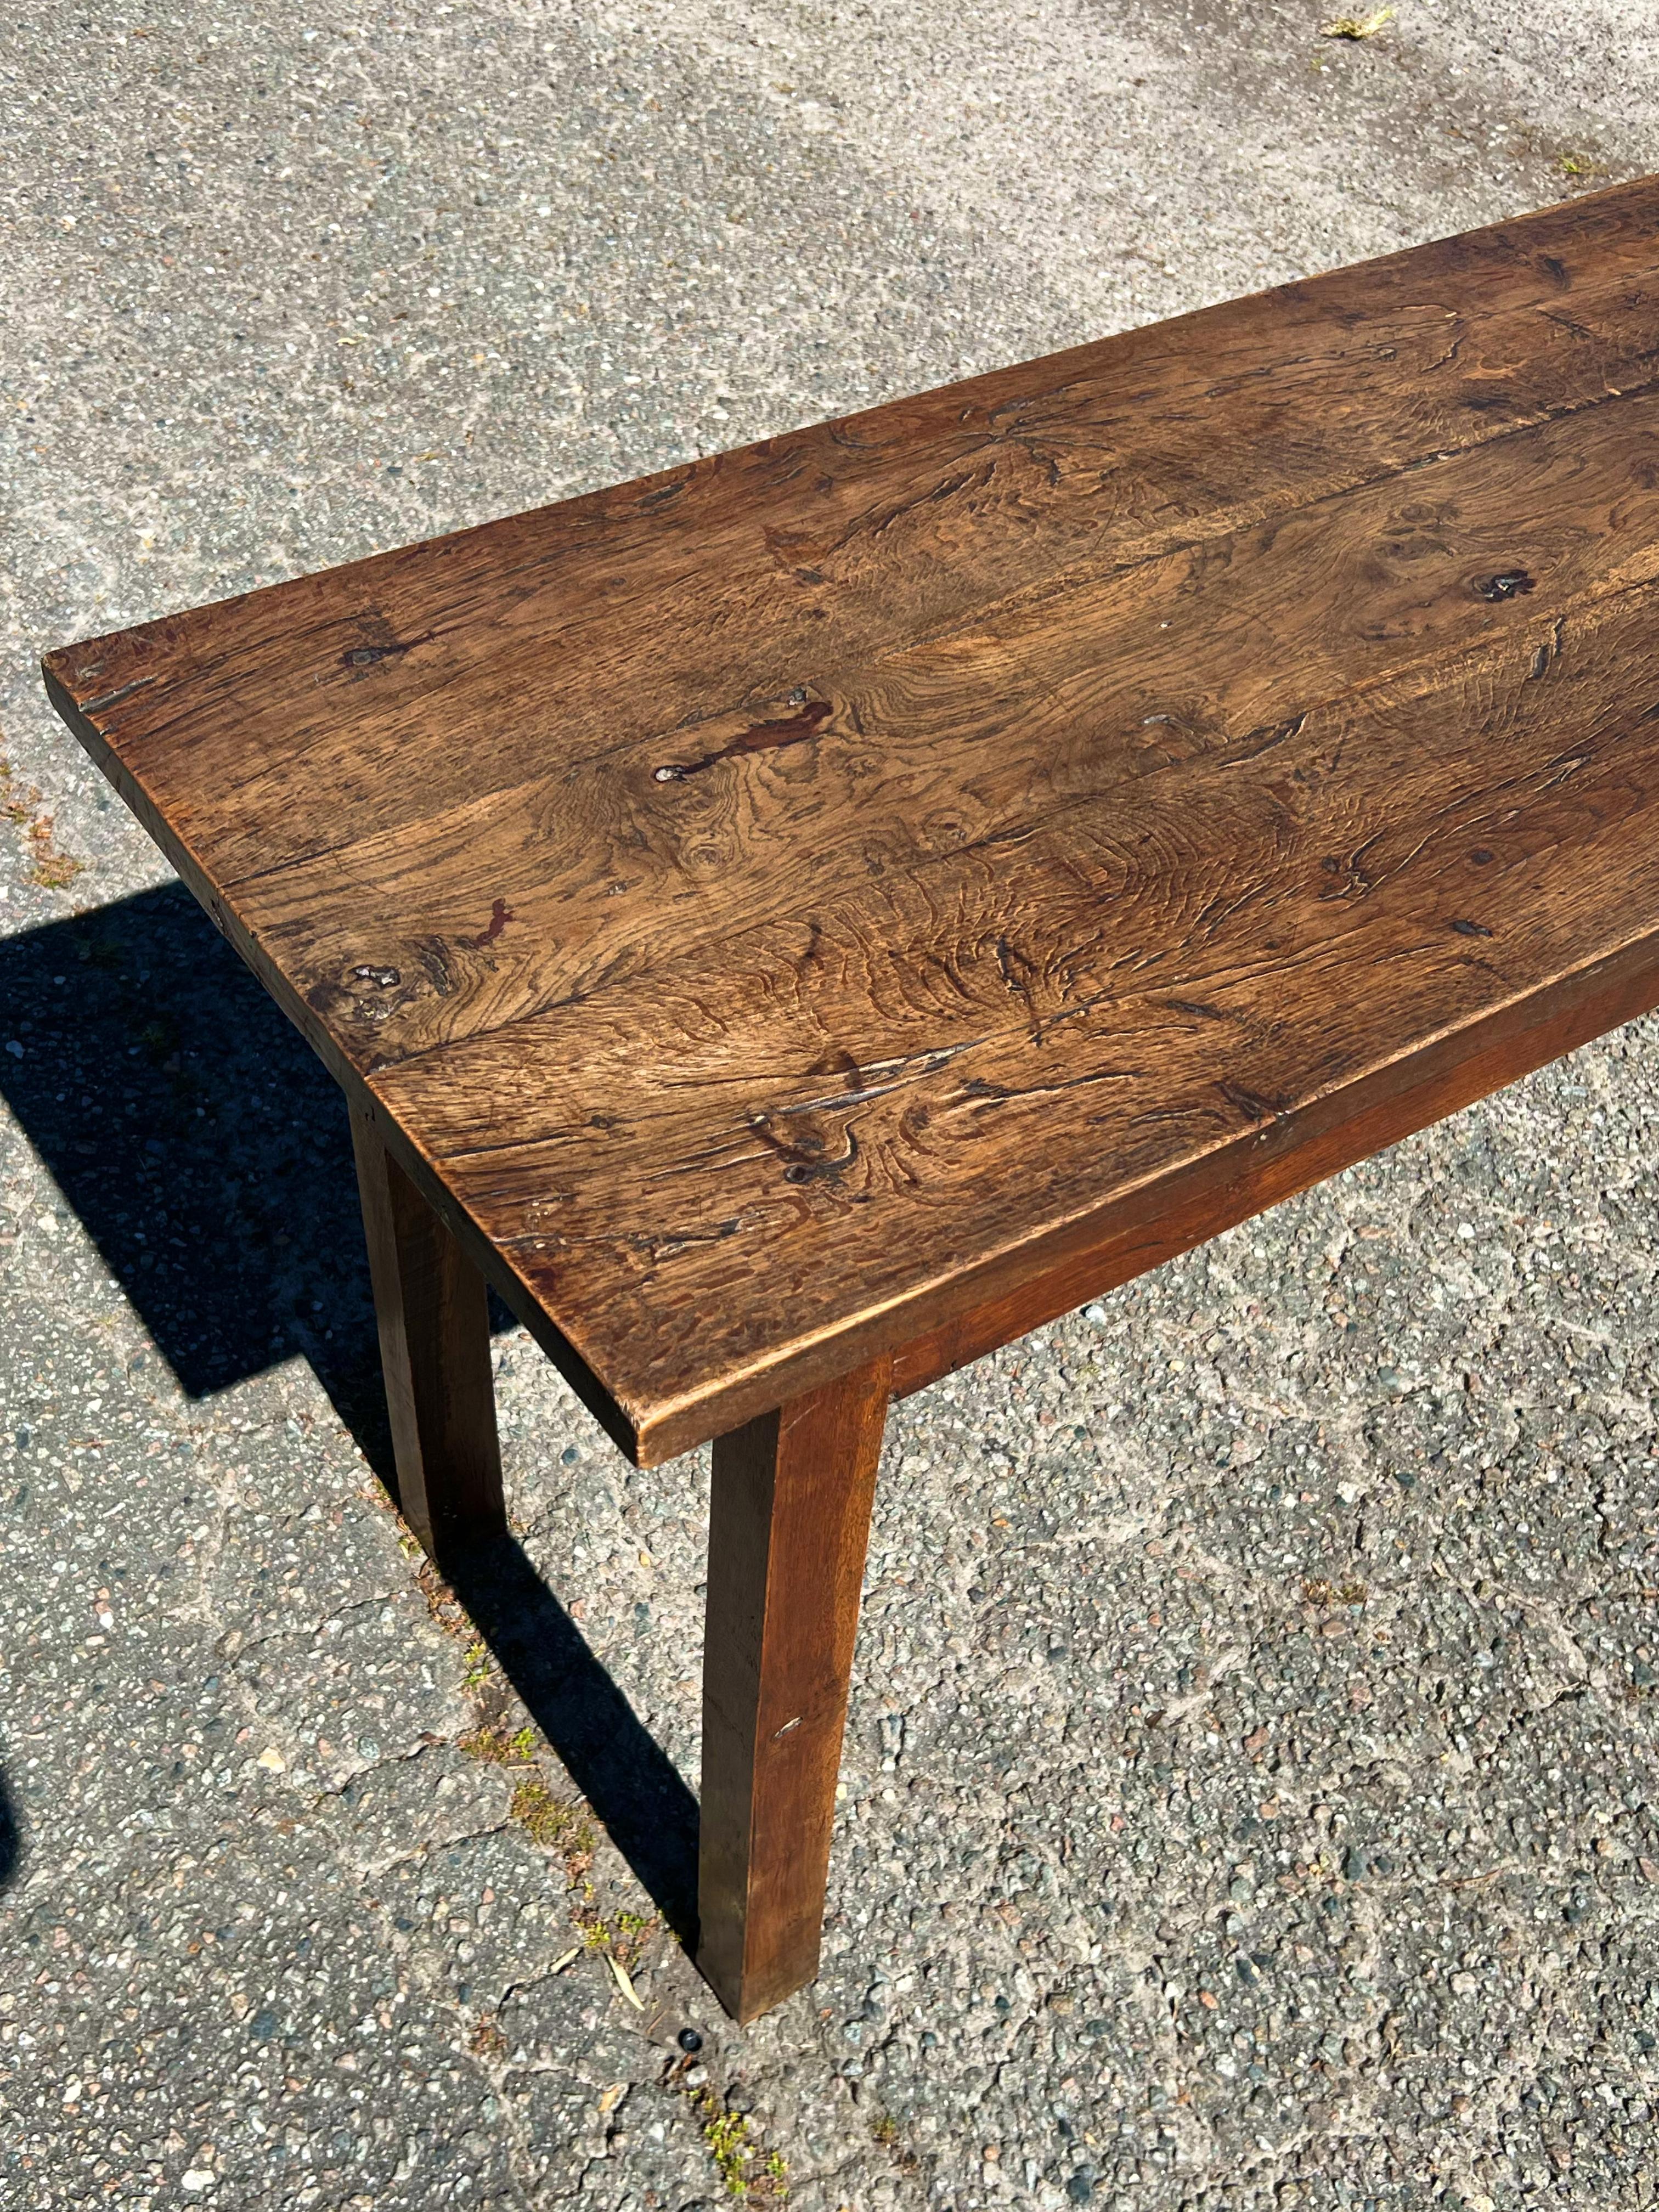 French Oak Farmhouse Table, ideal as a console or writing table.  The top consists of three oak planks and the bottom is a French walnut.  The legs and base have mortise and tenon joints. The table is very sturdy.  The top has developed a warm, nut